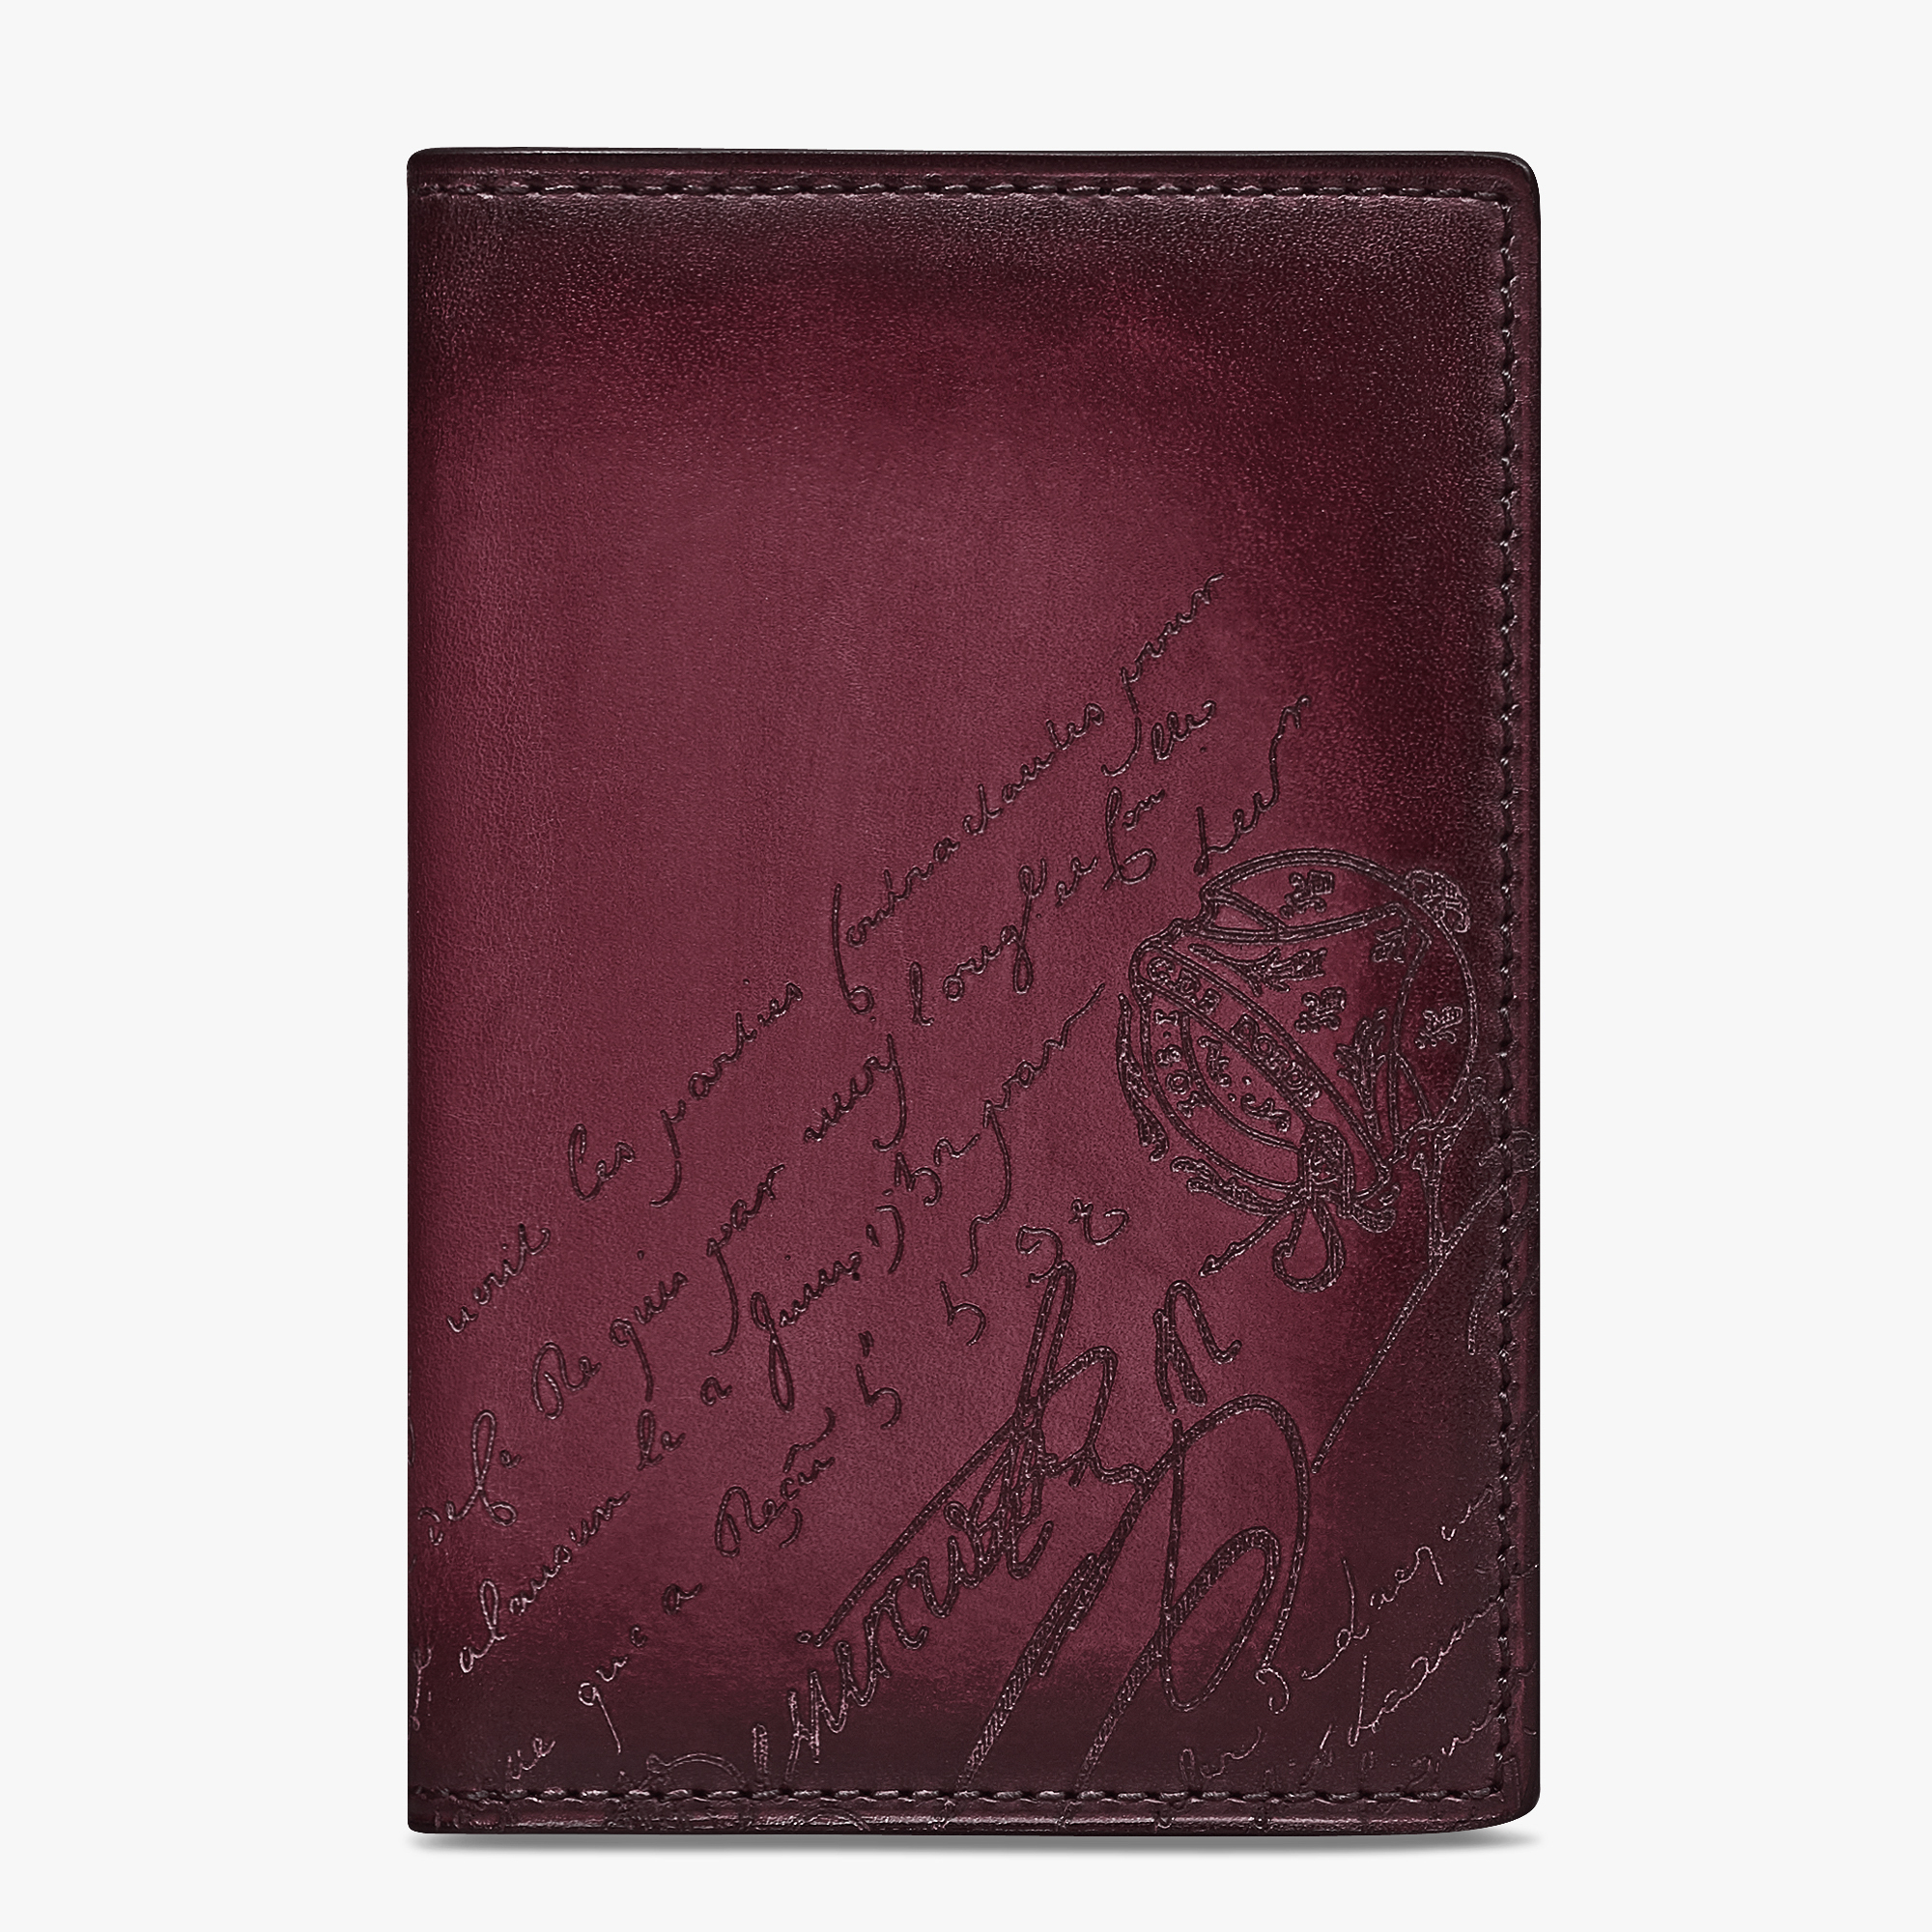 Jagua Scritto Swipe Leather Card Holder, FLAMING RED, hi-res